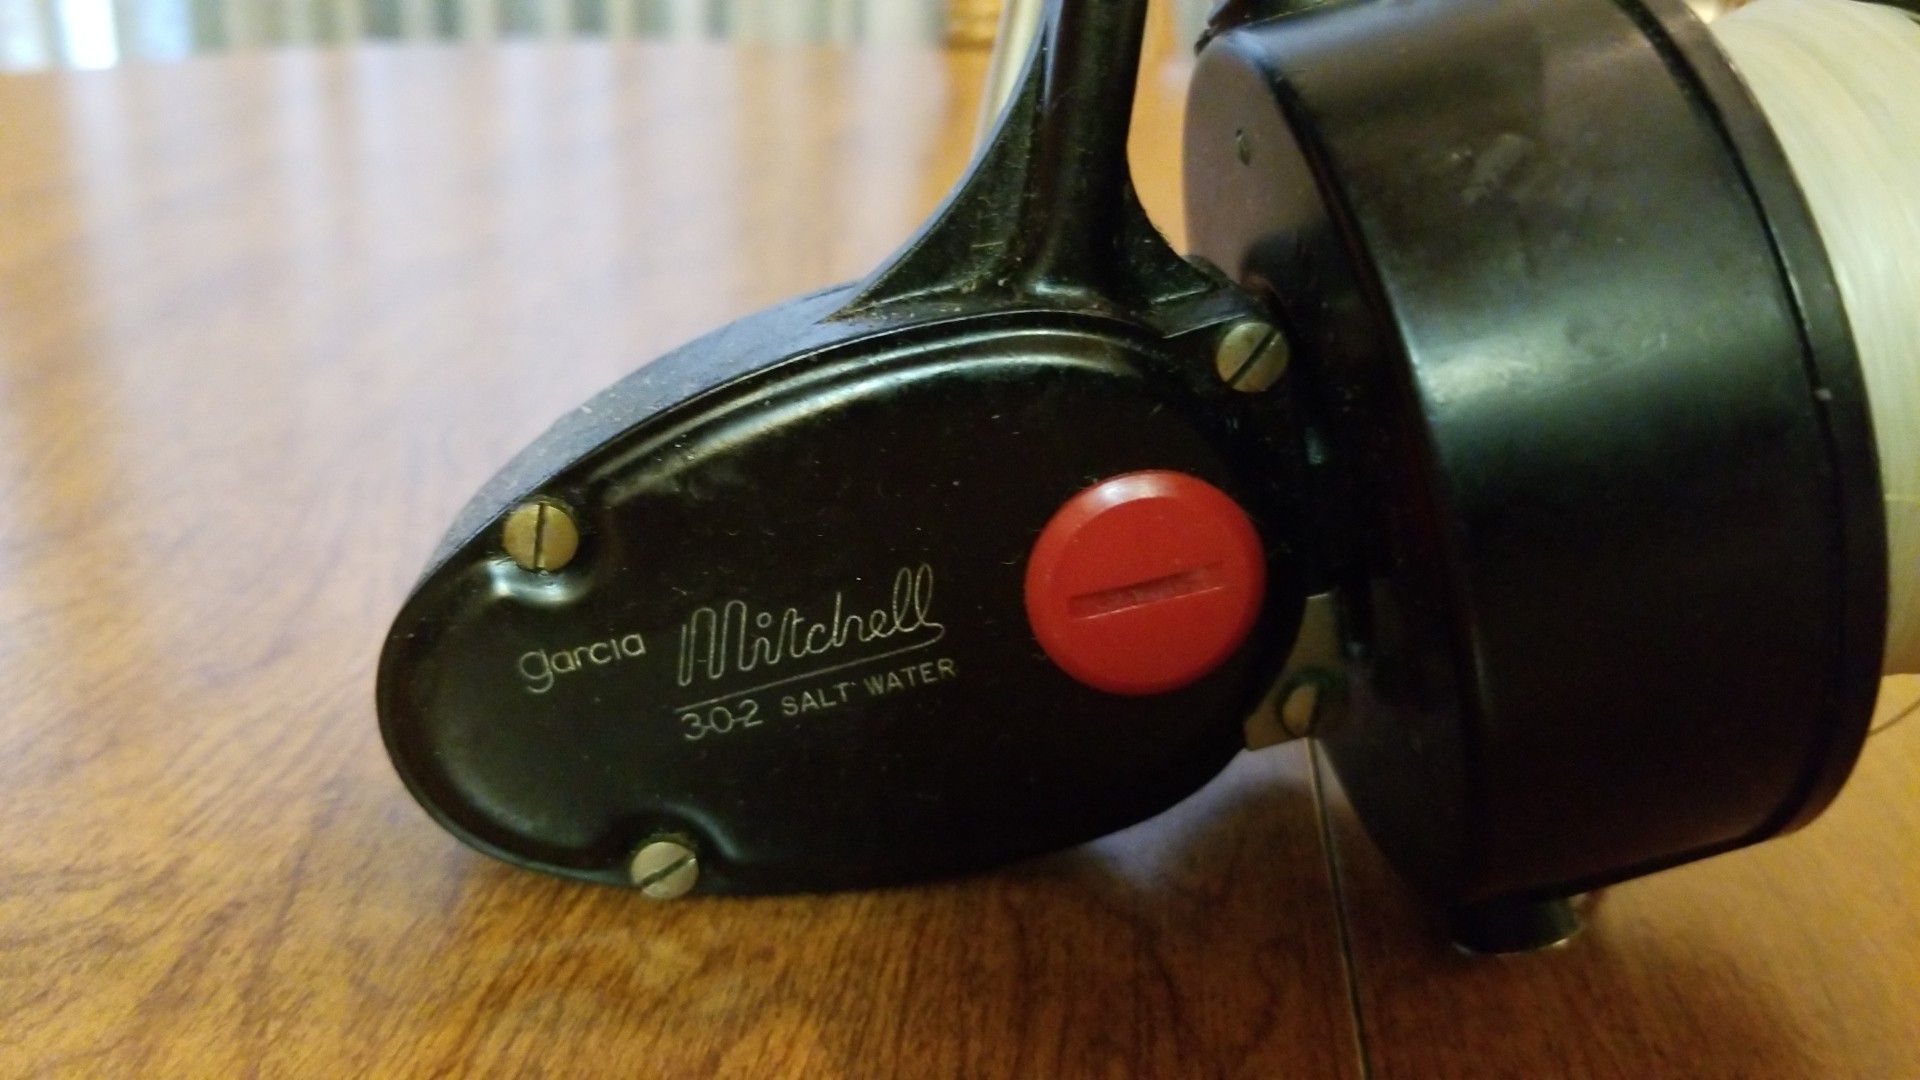 Vintage Abu Garcia Mitchell 302 saltwater spinning reel made in France  Works excellent for all types of fresh or saltwater fishing for Sale in  Montclair, CA - OfferUp